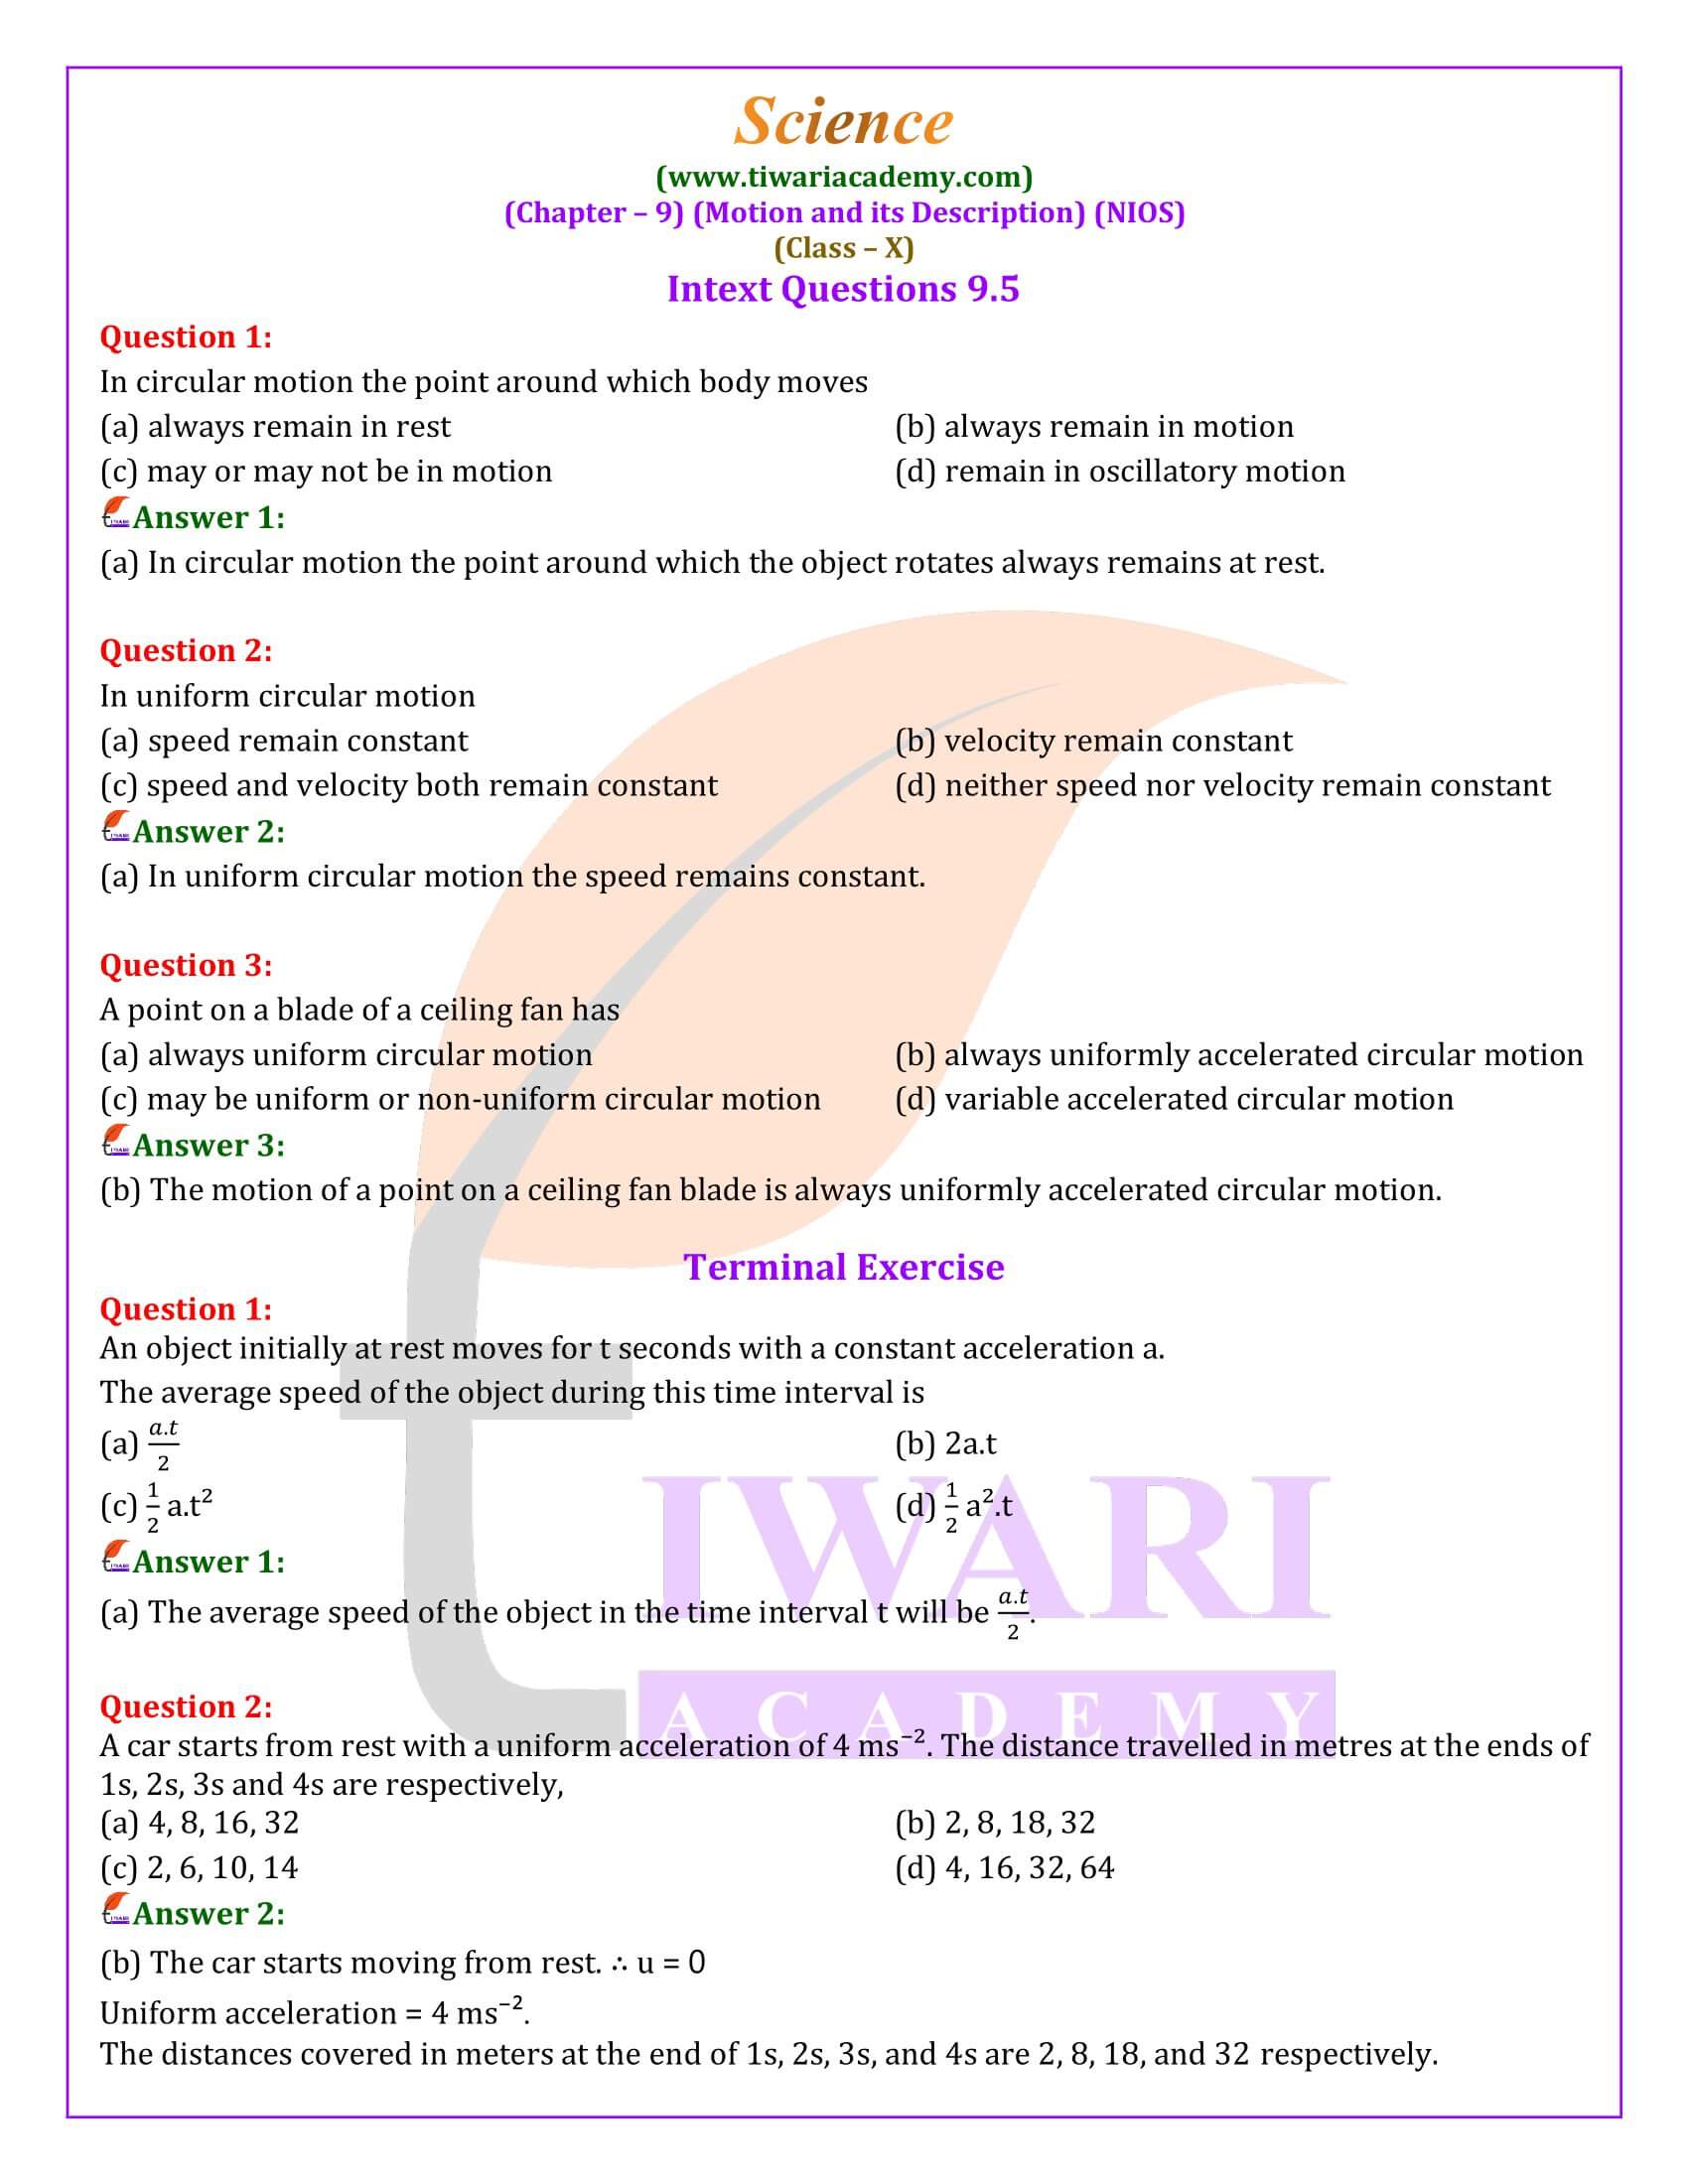 NIOS Class 10 Science Chapter 9 Solutions in English